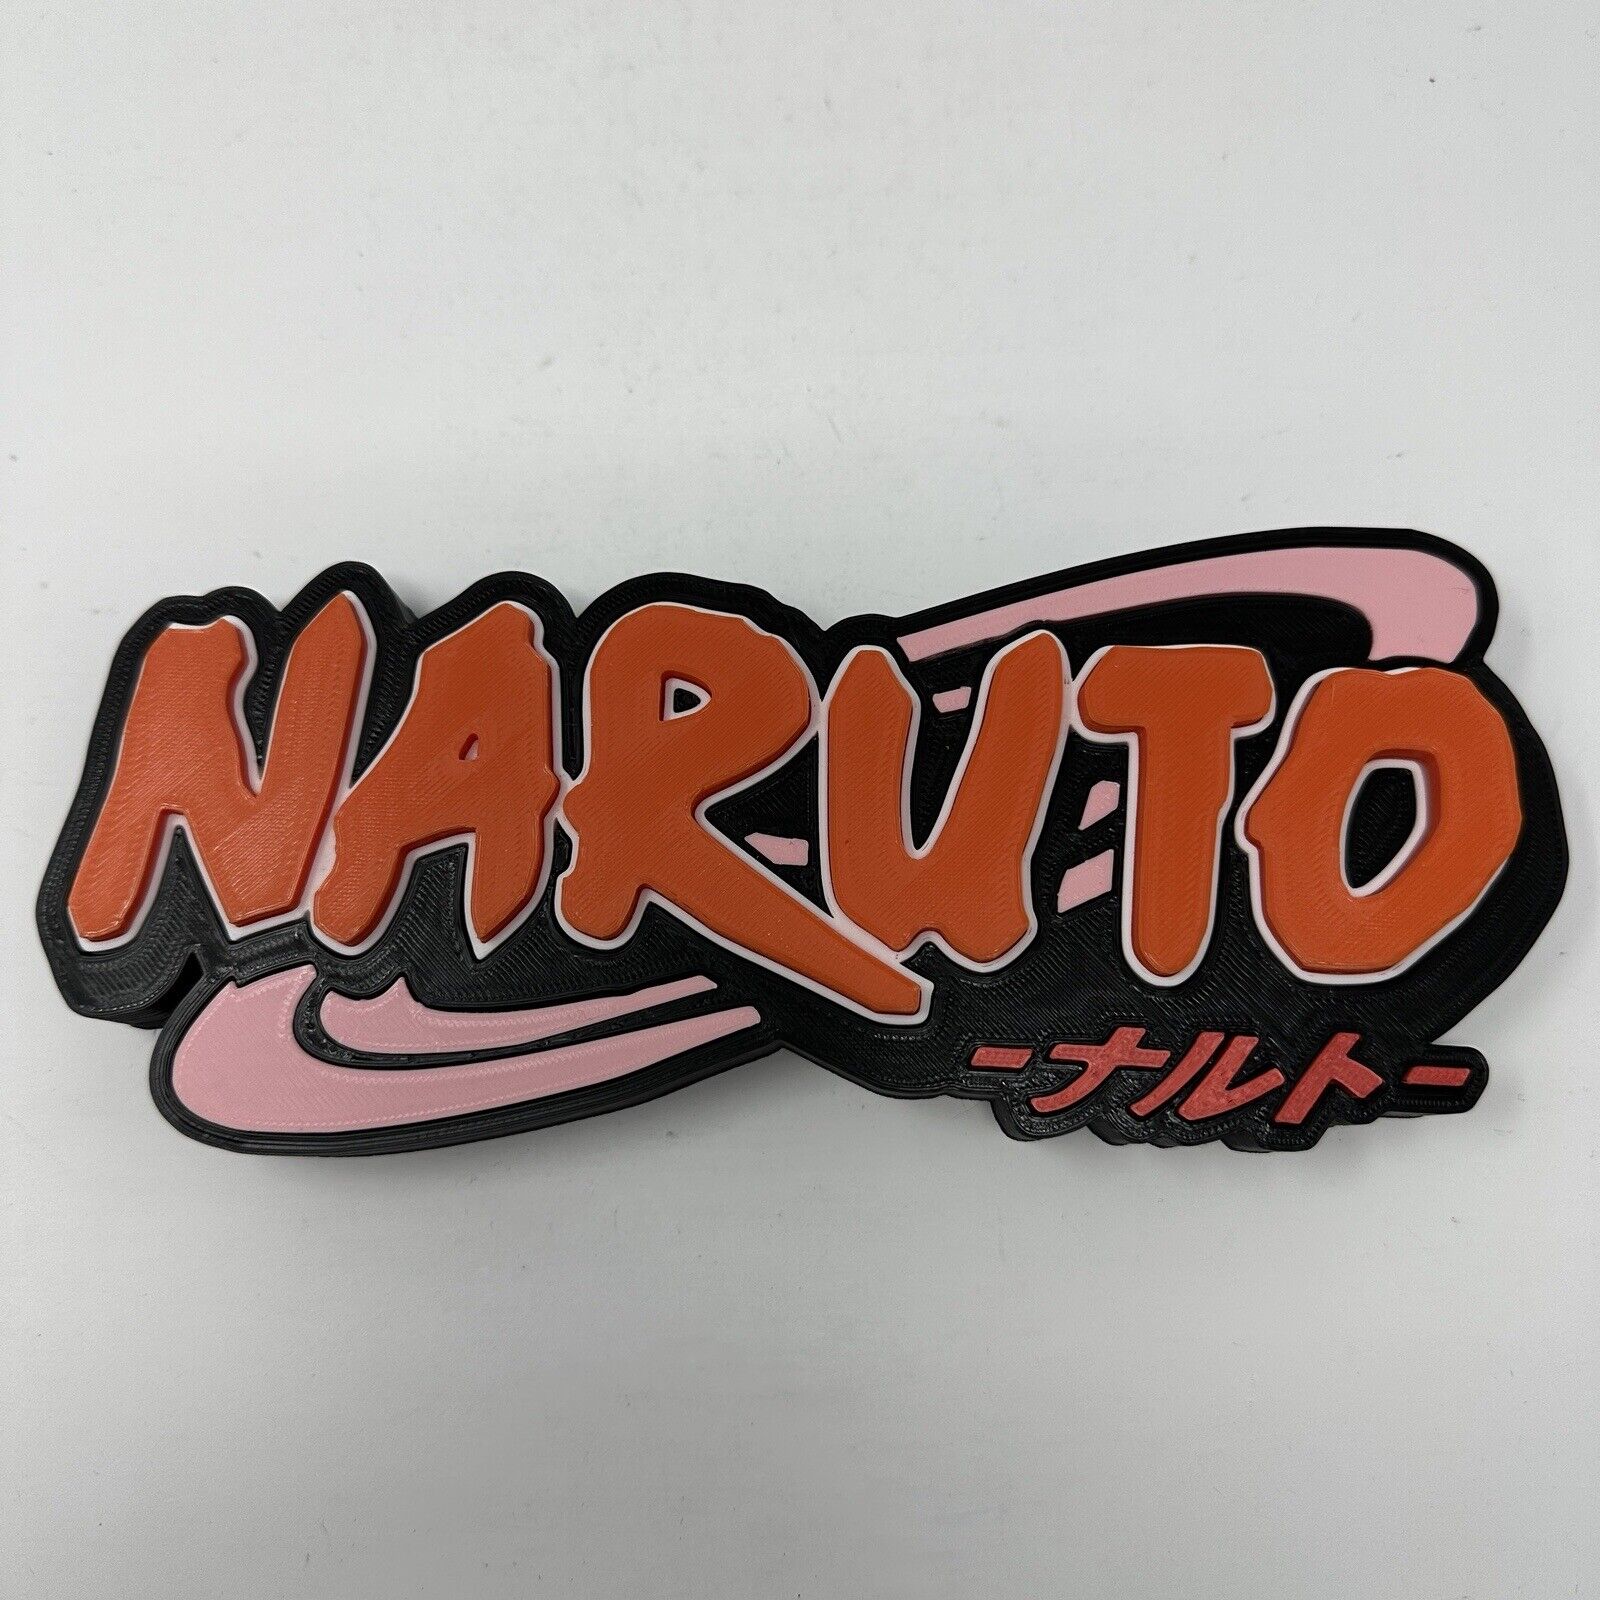 3D Printed  NARUTO Sign for your Funko Pops and collectibles